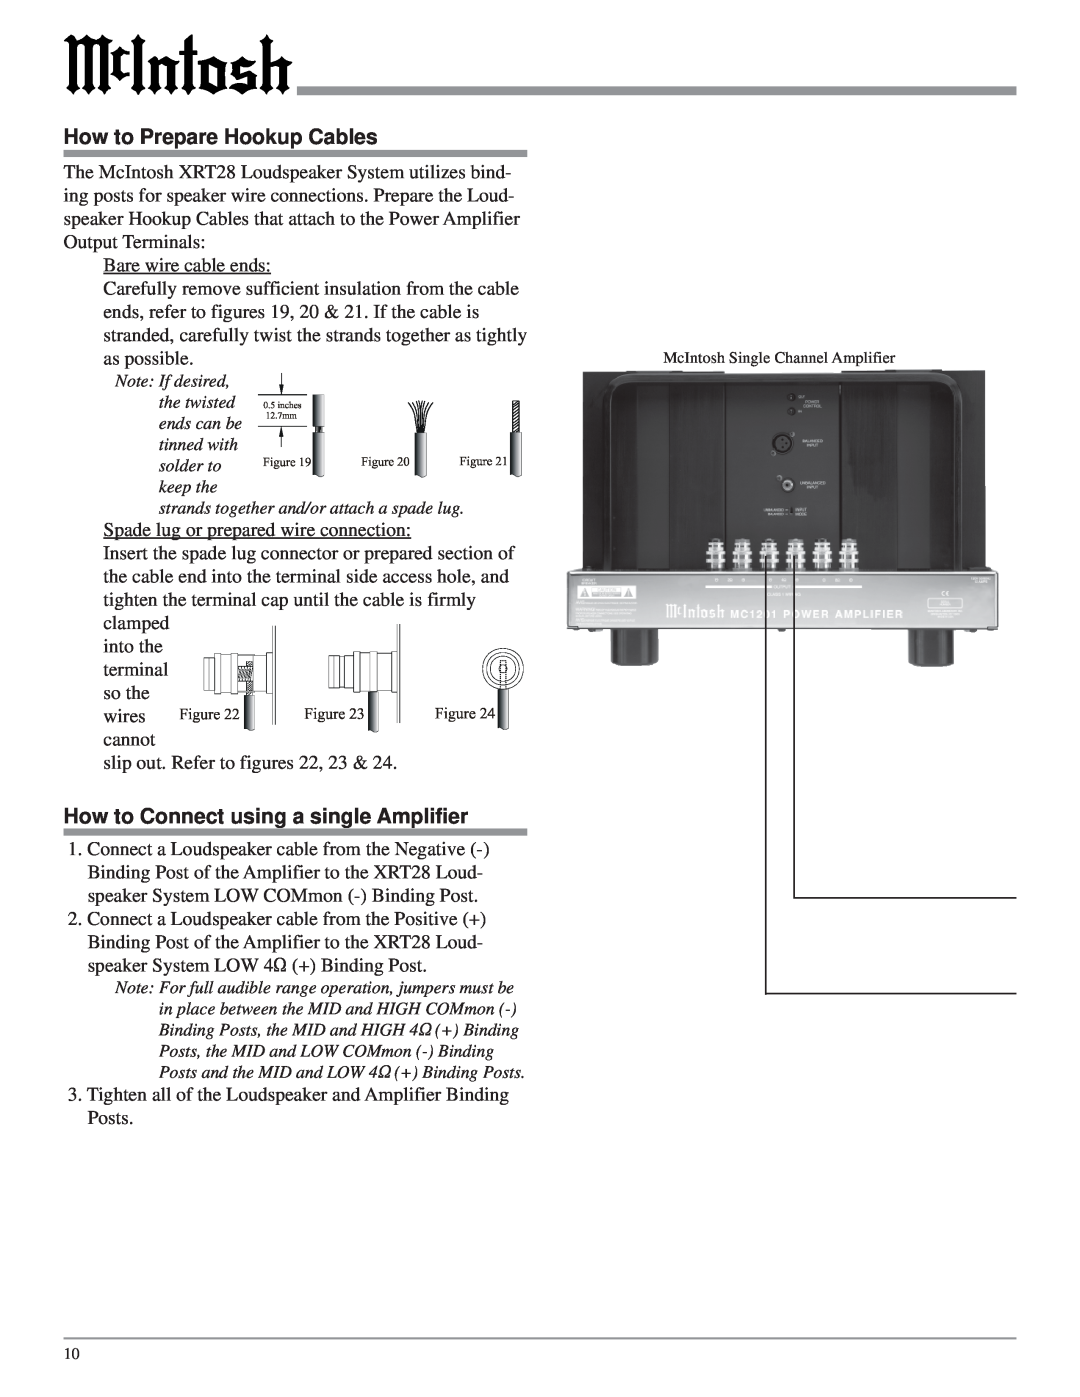 McIntosh XRT28 owner manual How to Prepare Hookup Cables, How to Connect using a single Amplifier 